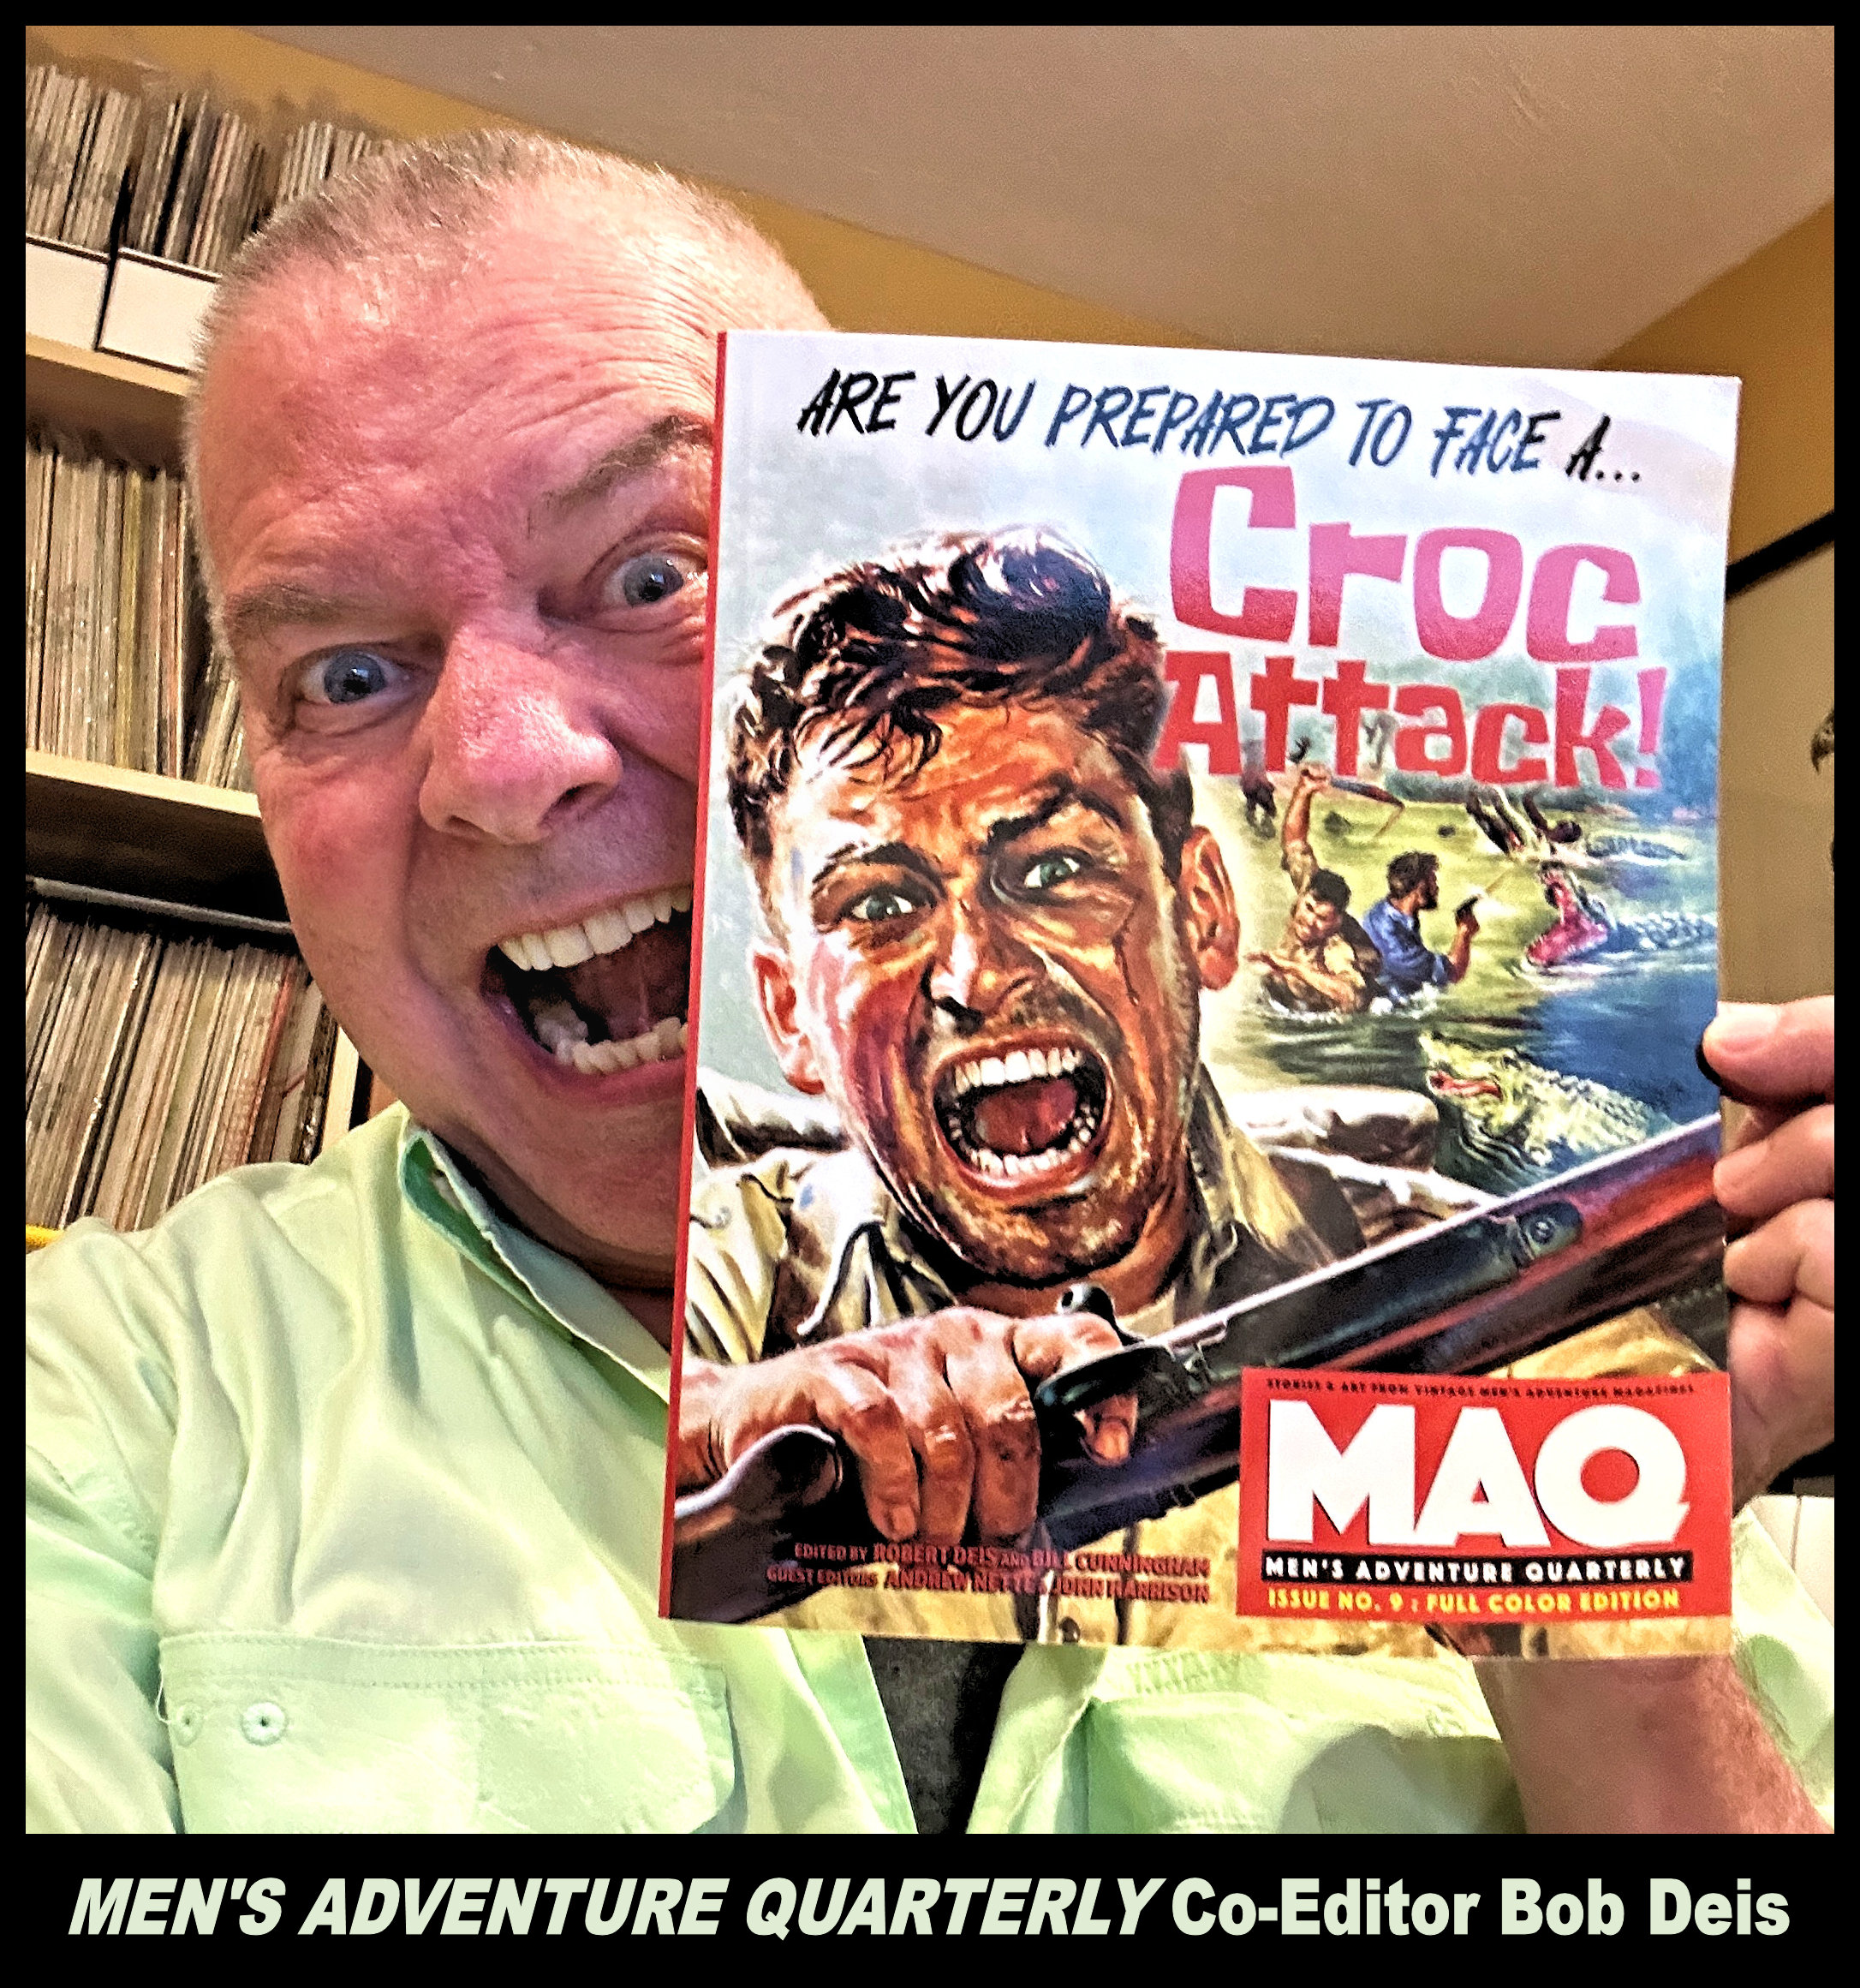 The MEN'S ADVENTURE QUARTERLY #9—the “Croc Attack” issue, Preview